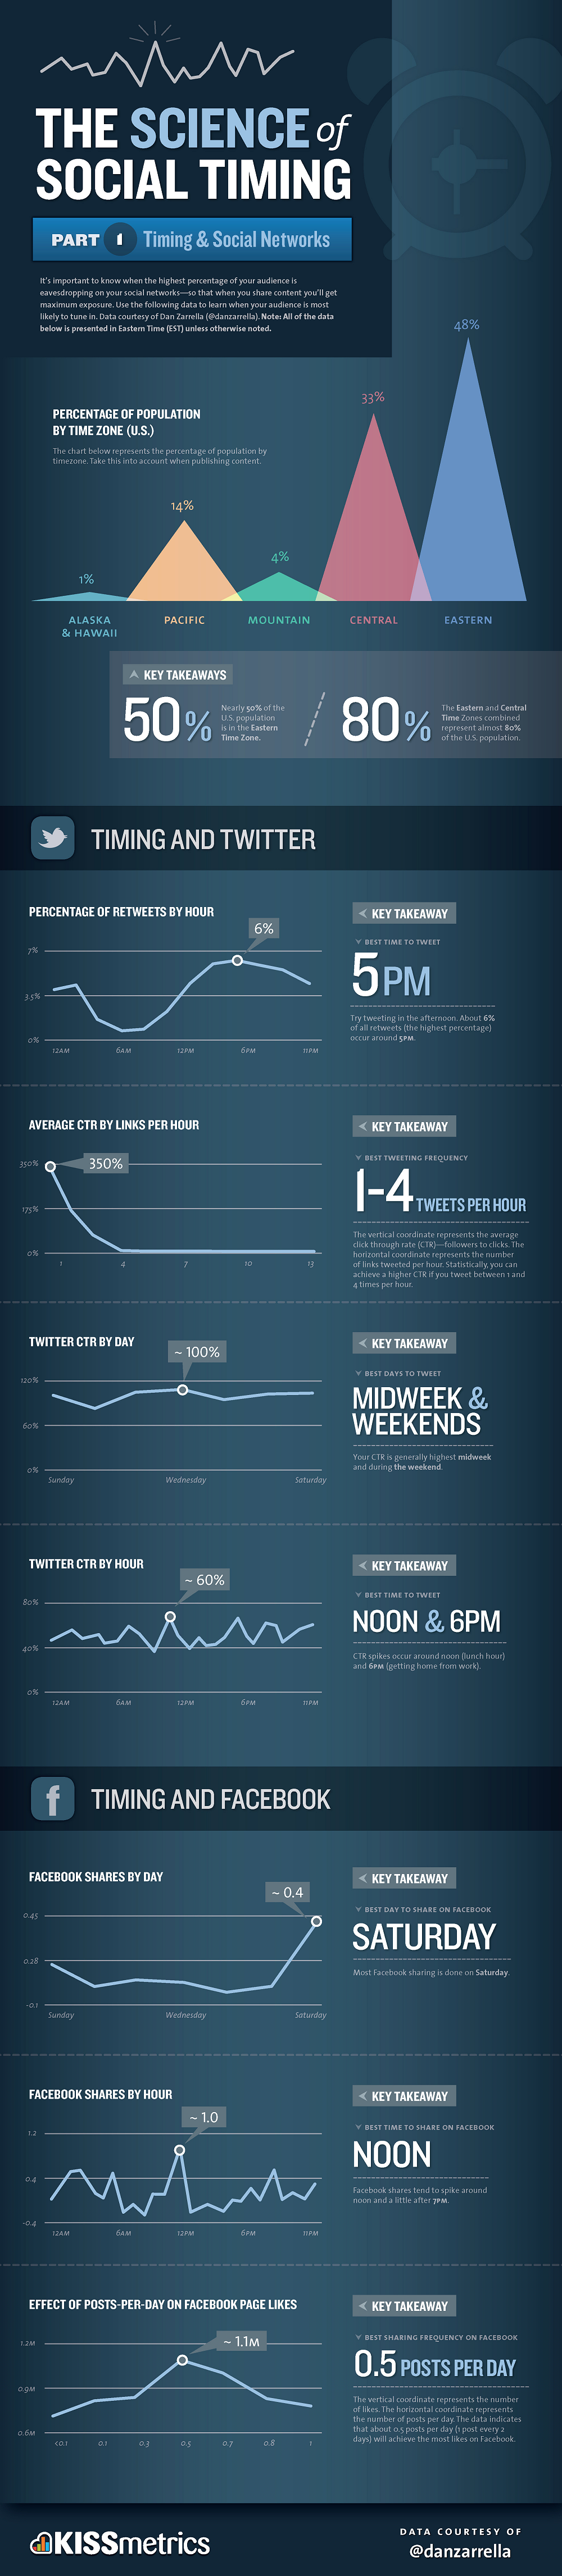 Infographic on How to Get Social Timing Right Part 1: Timing and Social Networks